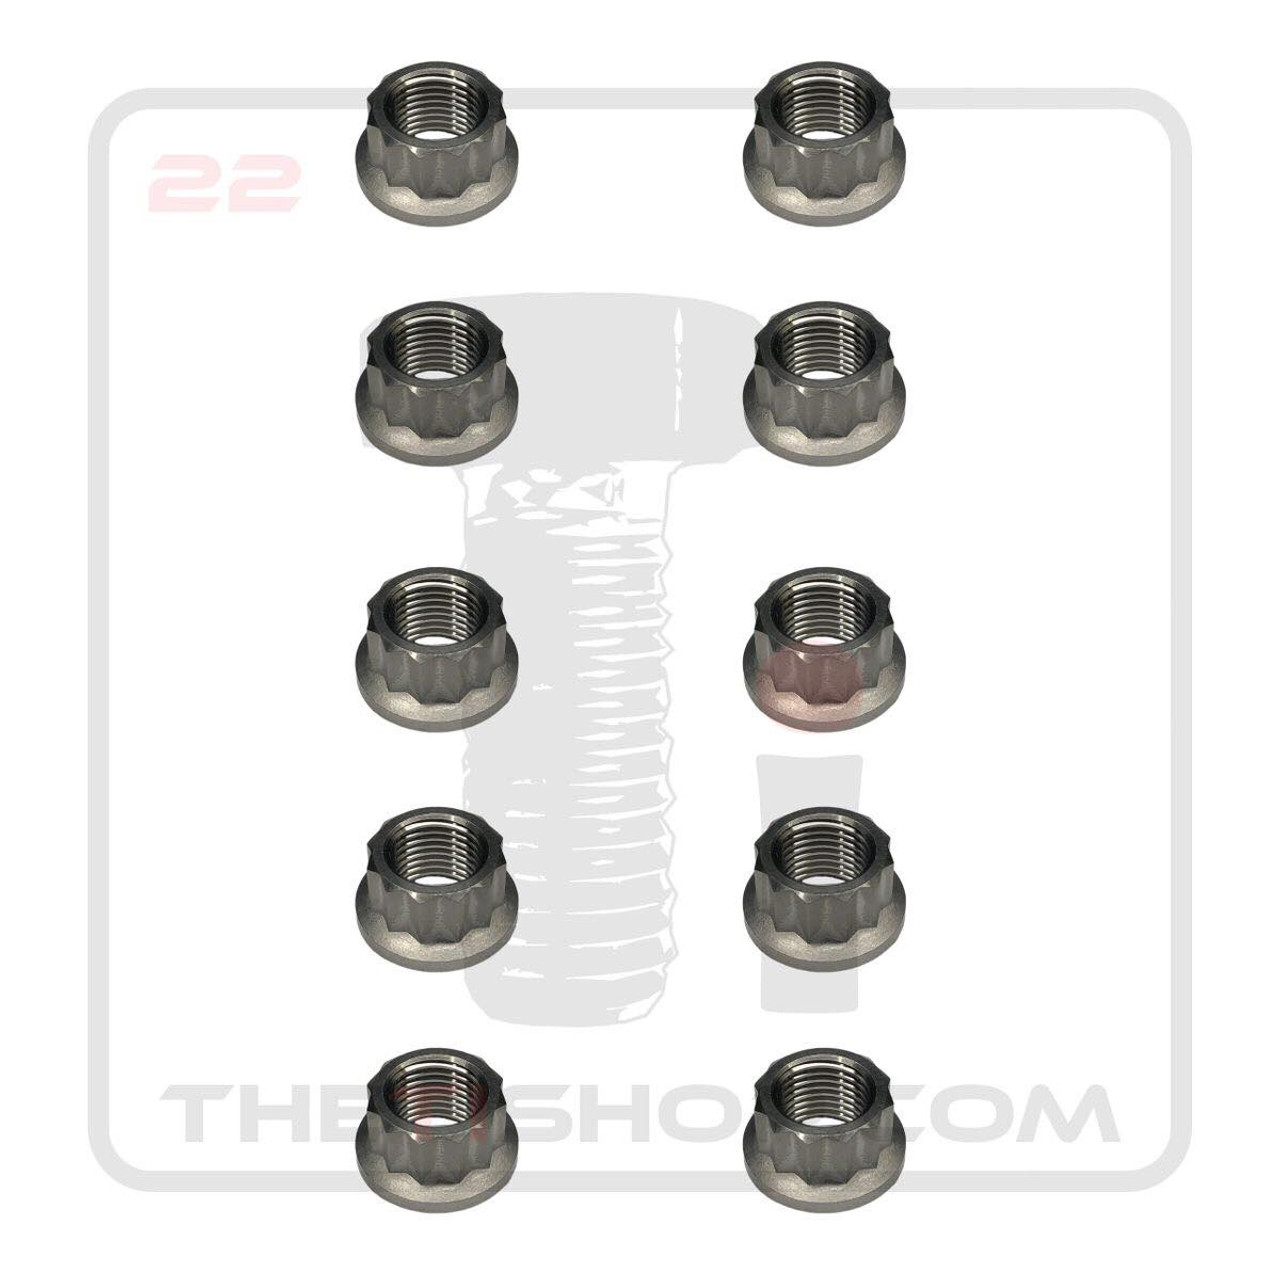 10 Pack of The Ti Shop Titanium 12 Point 1/2-20 Flanged Nuts